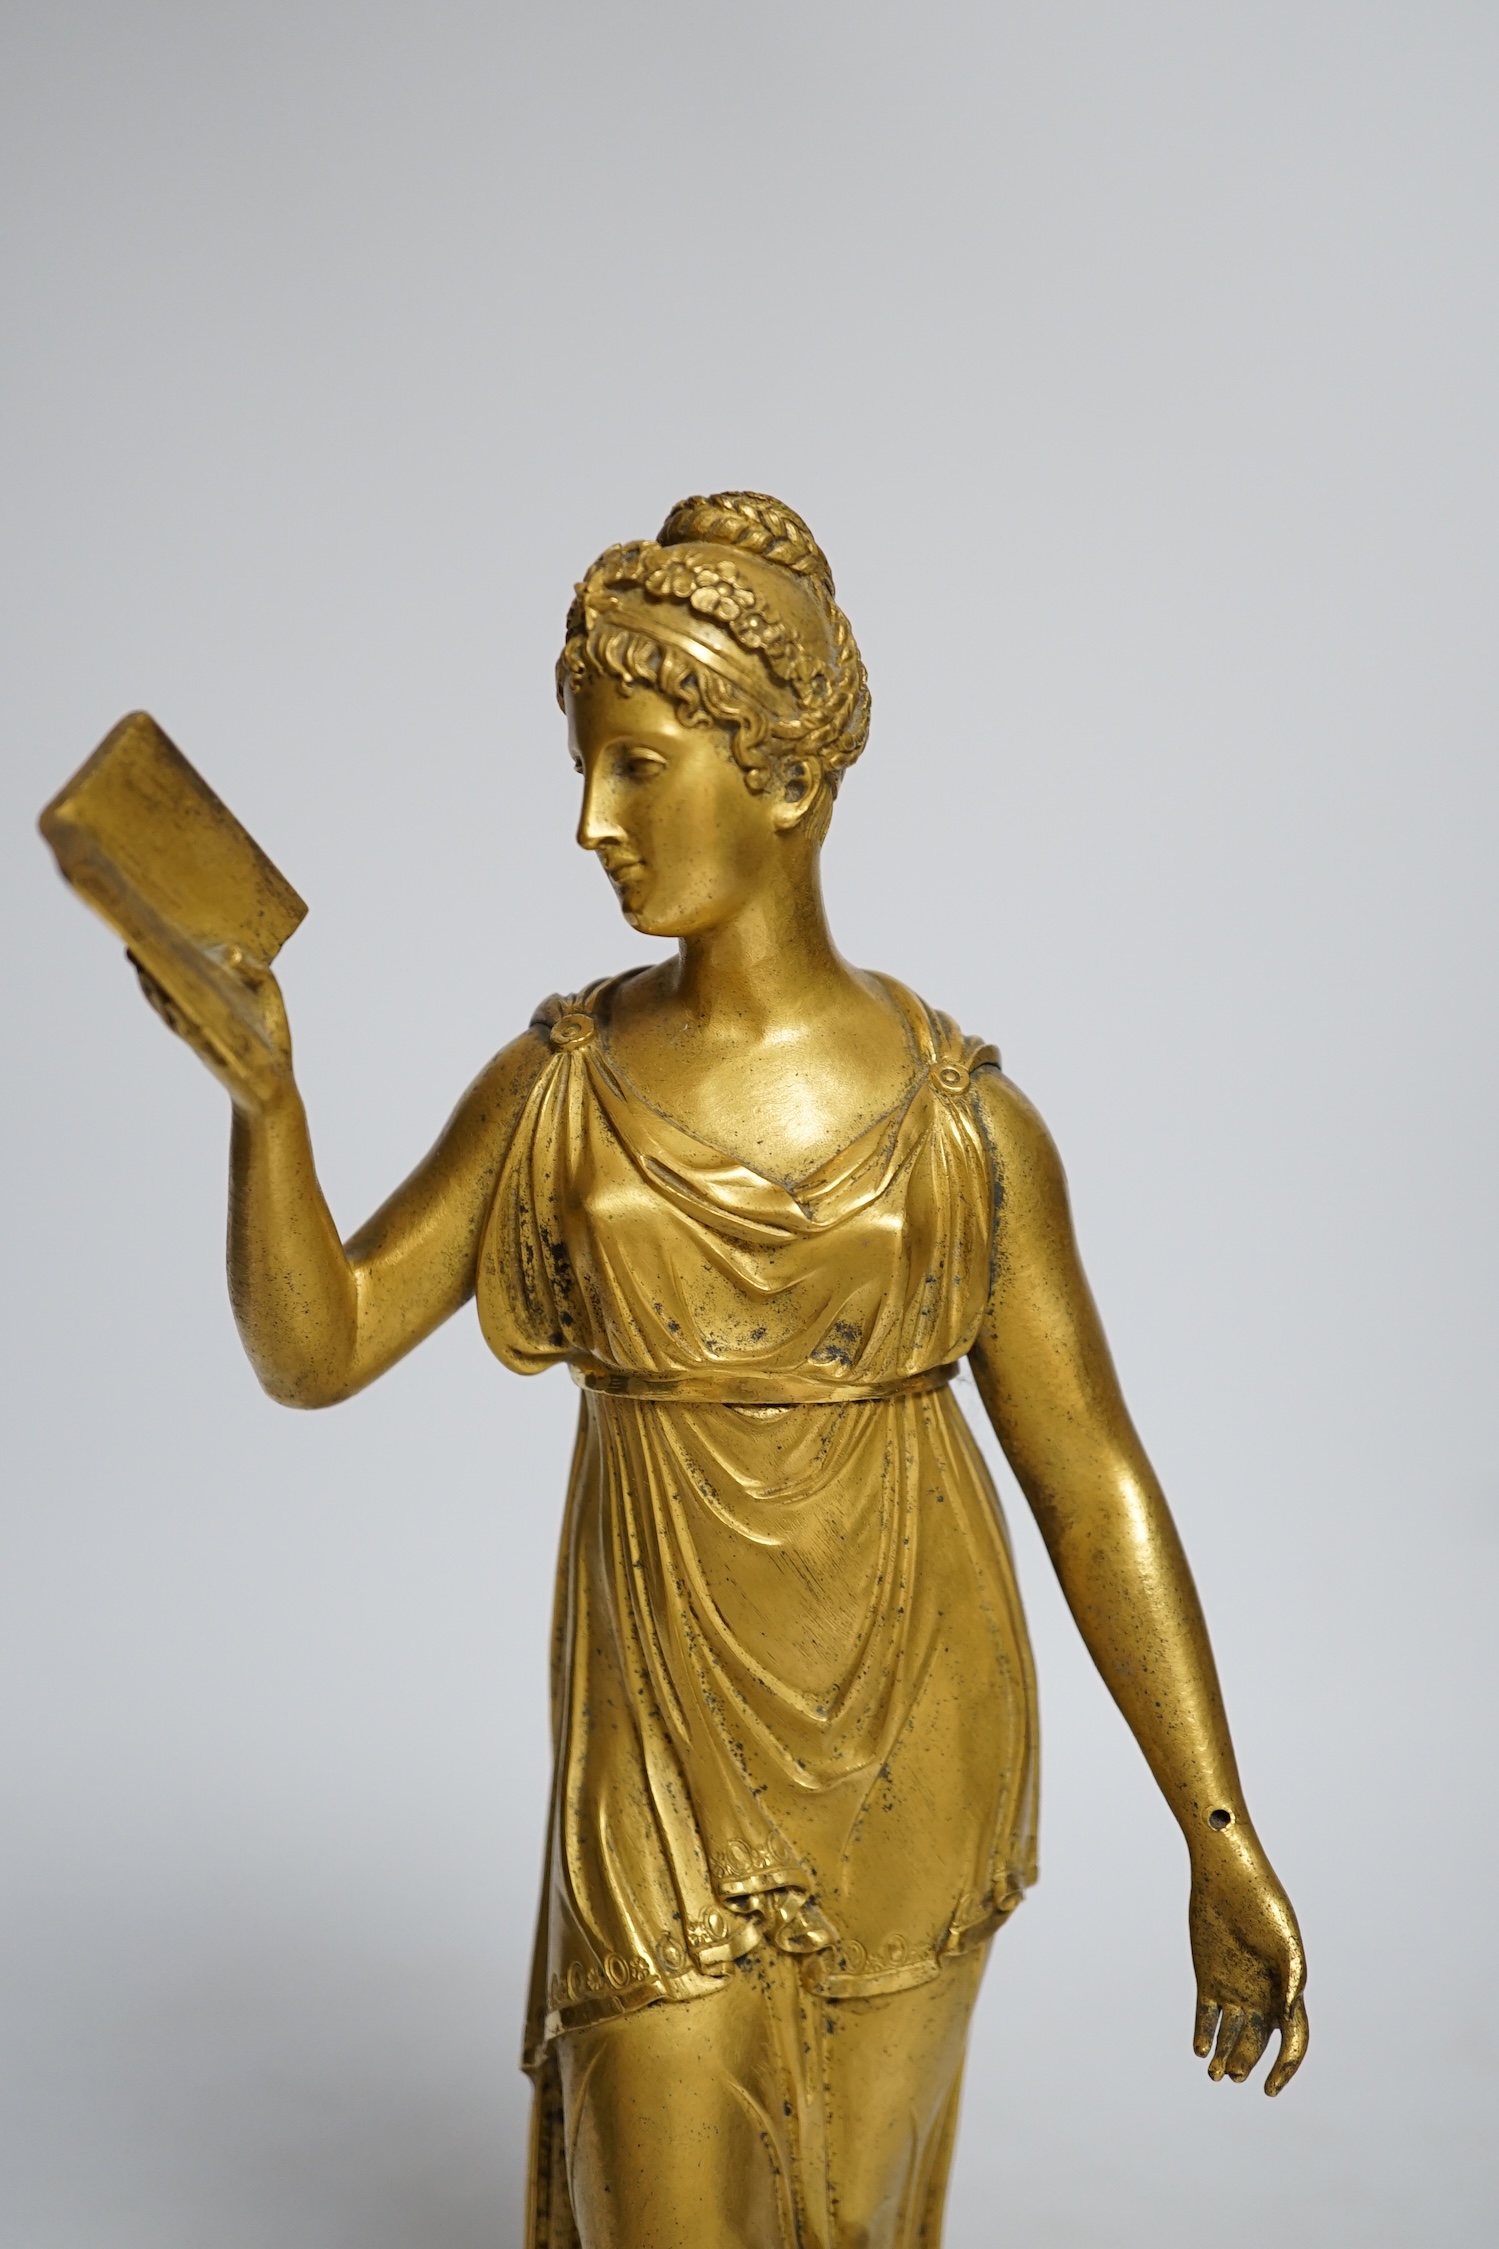 A 19th century French ormolu figure of a woman reading, on a two-piece grey marble base, 33cm high